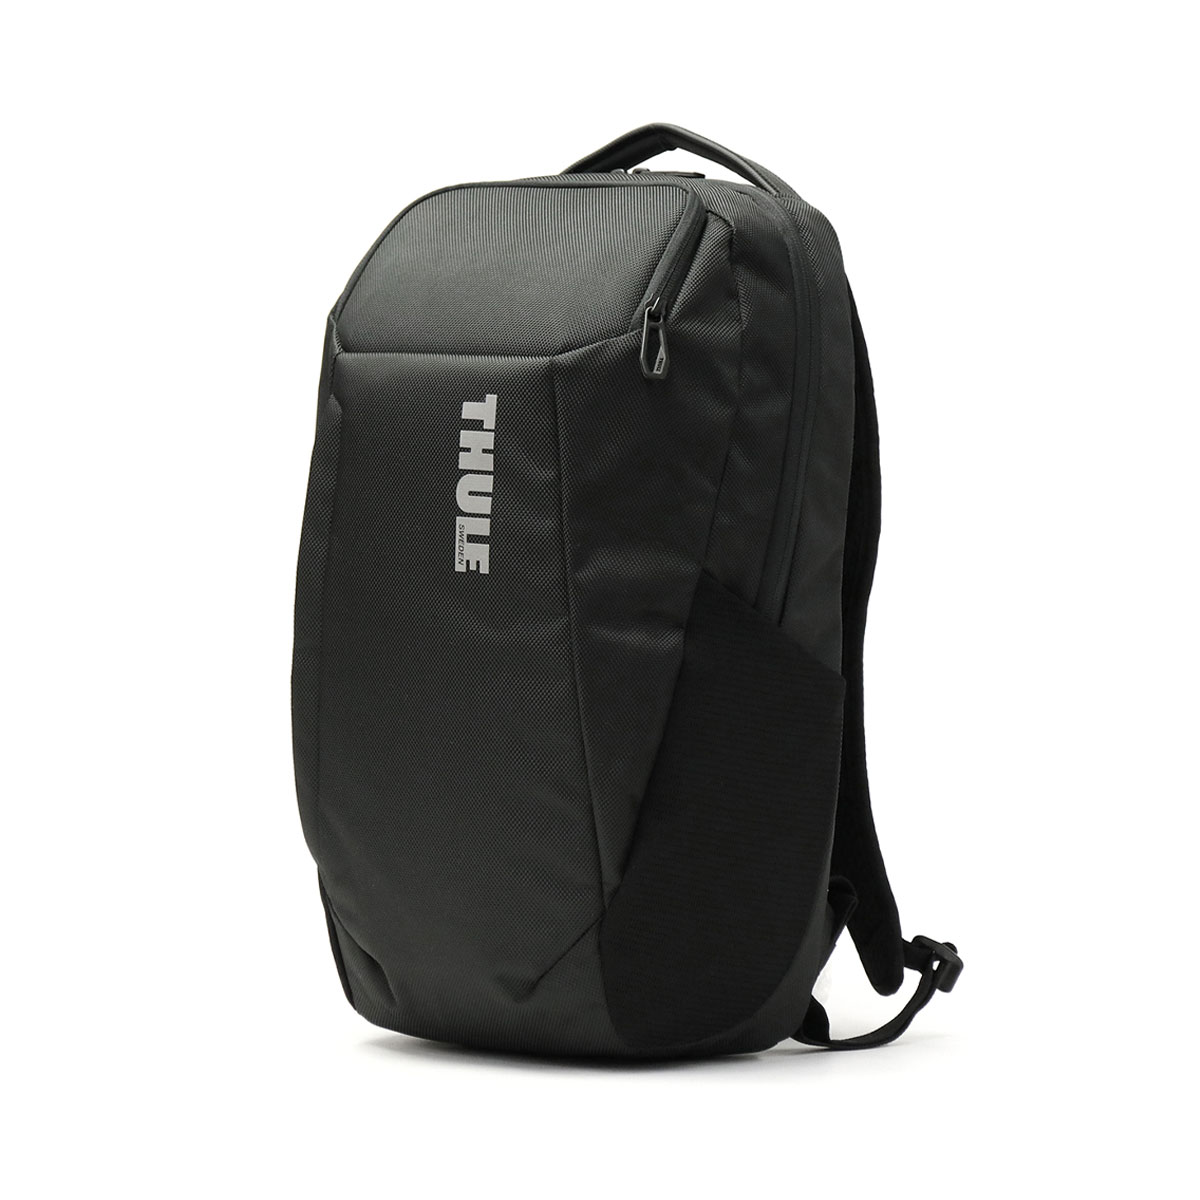 THULE スーリー Thule Accent Backpack バックパック 20L TACBP-115